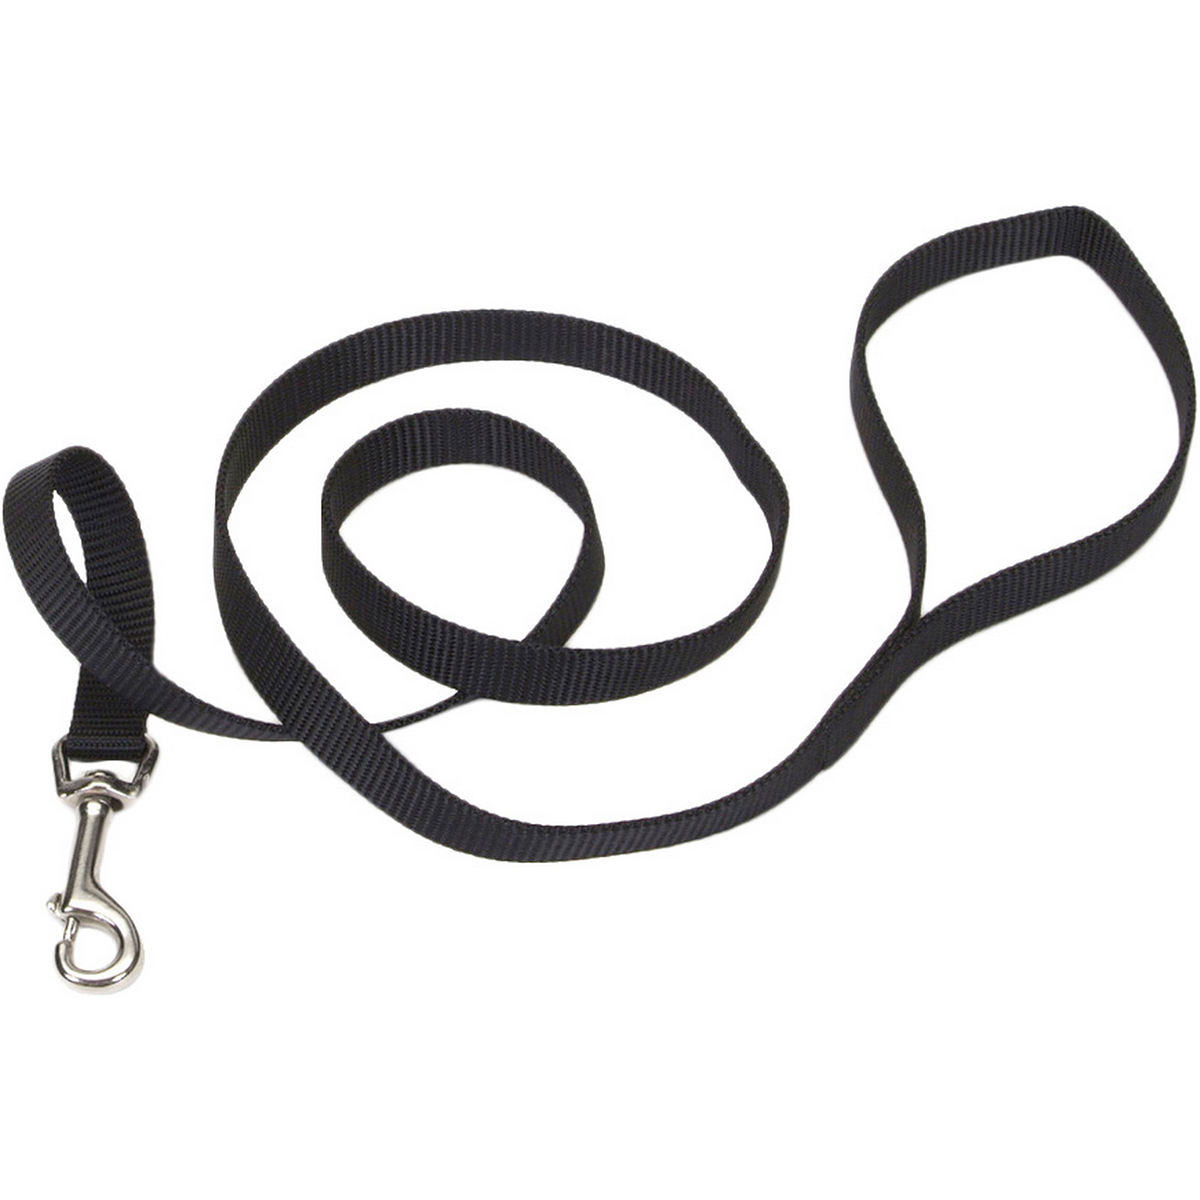 Picture of Coastal Pet Products 00406-BLK06 0.62 in. x 6 ft. Single-Ply Nylon Training Dog Leash, Black